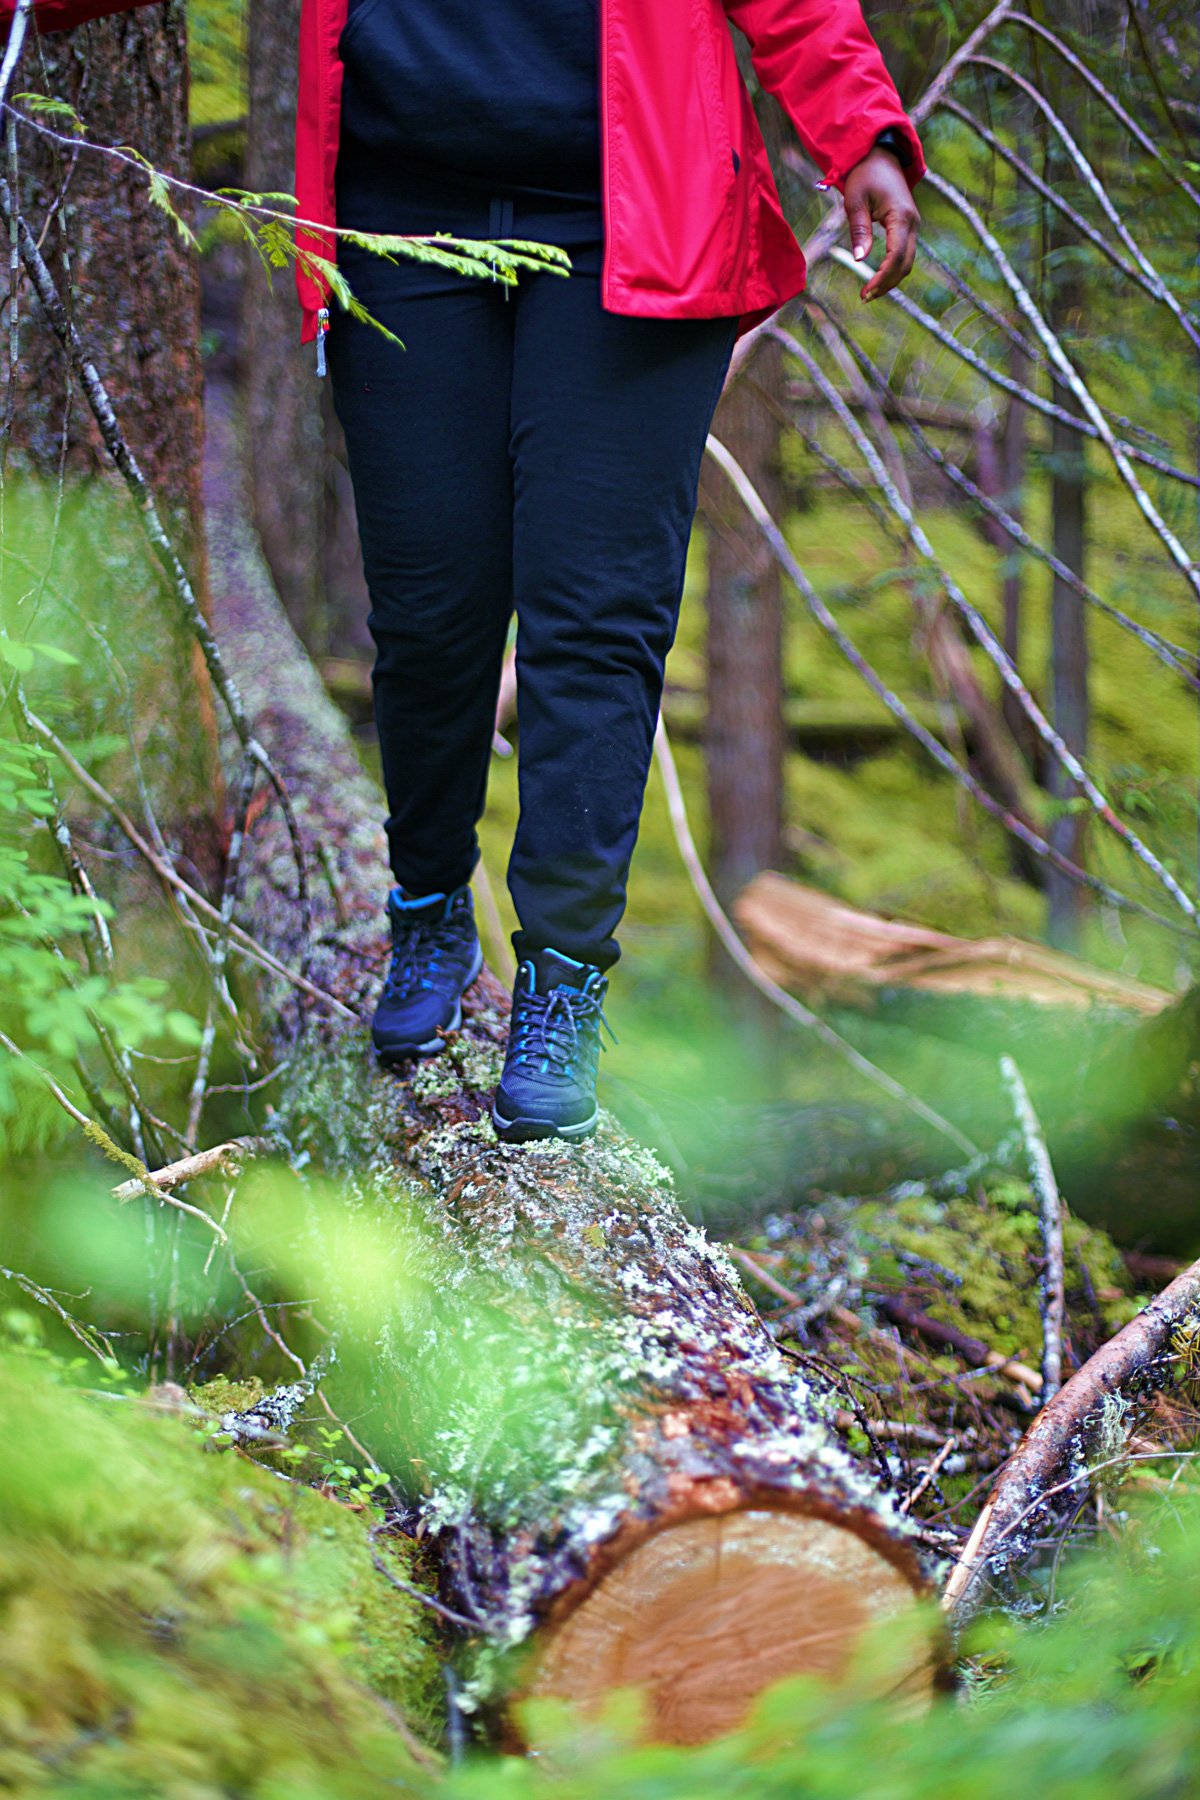 A woman walking across a log in the forest